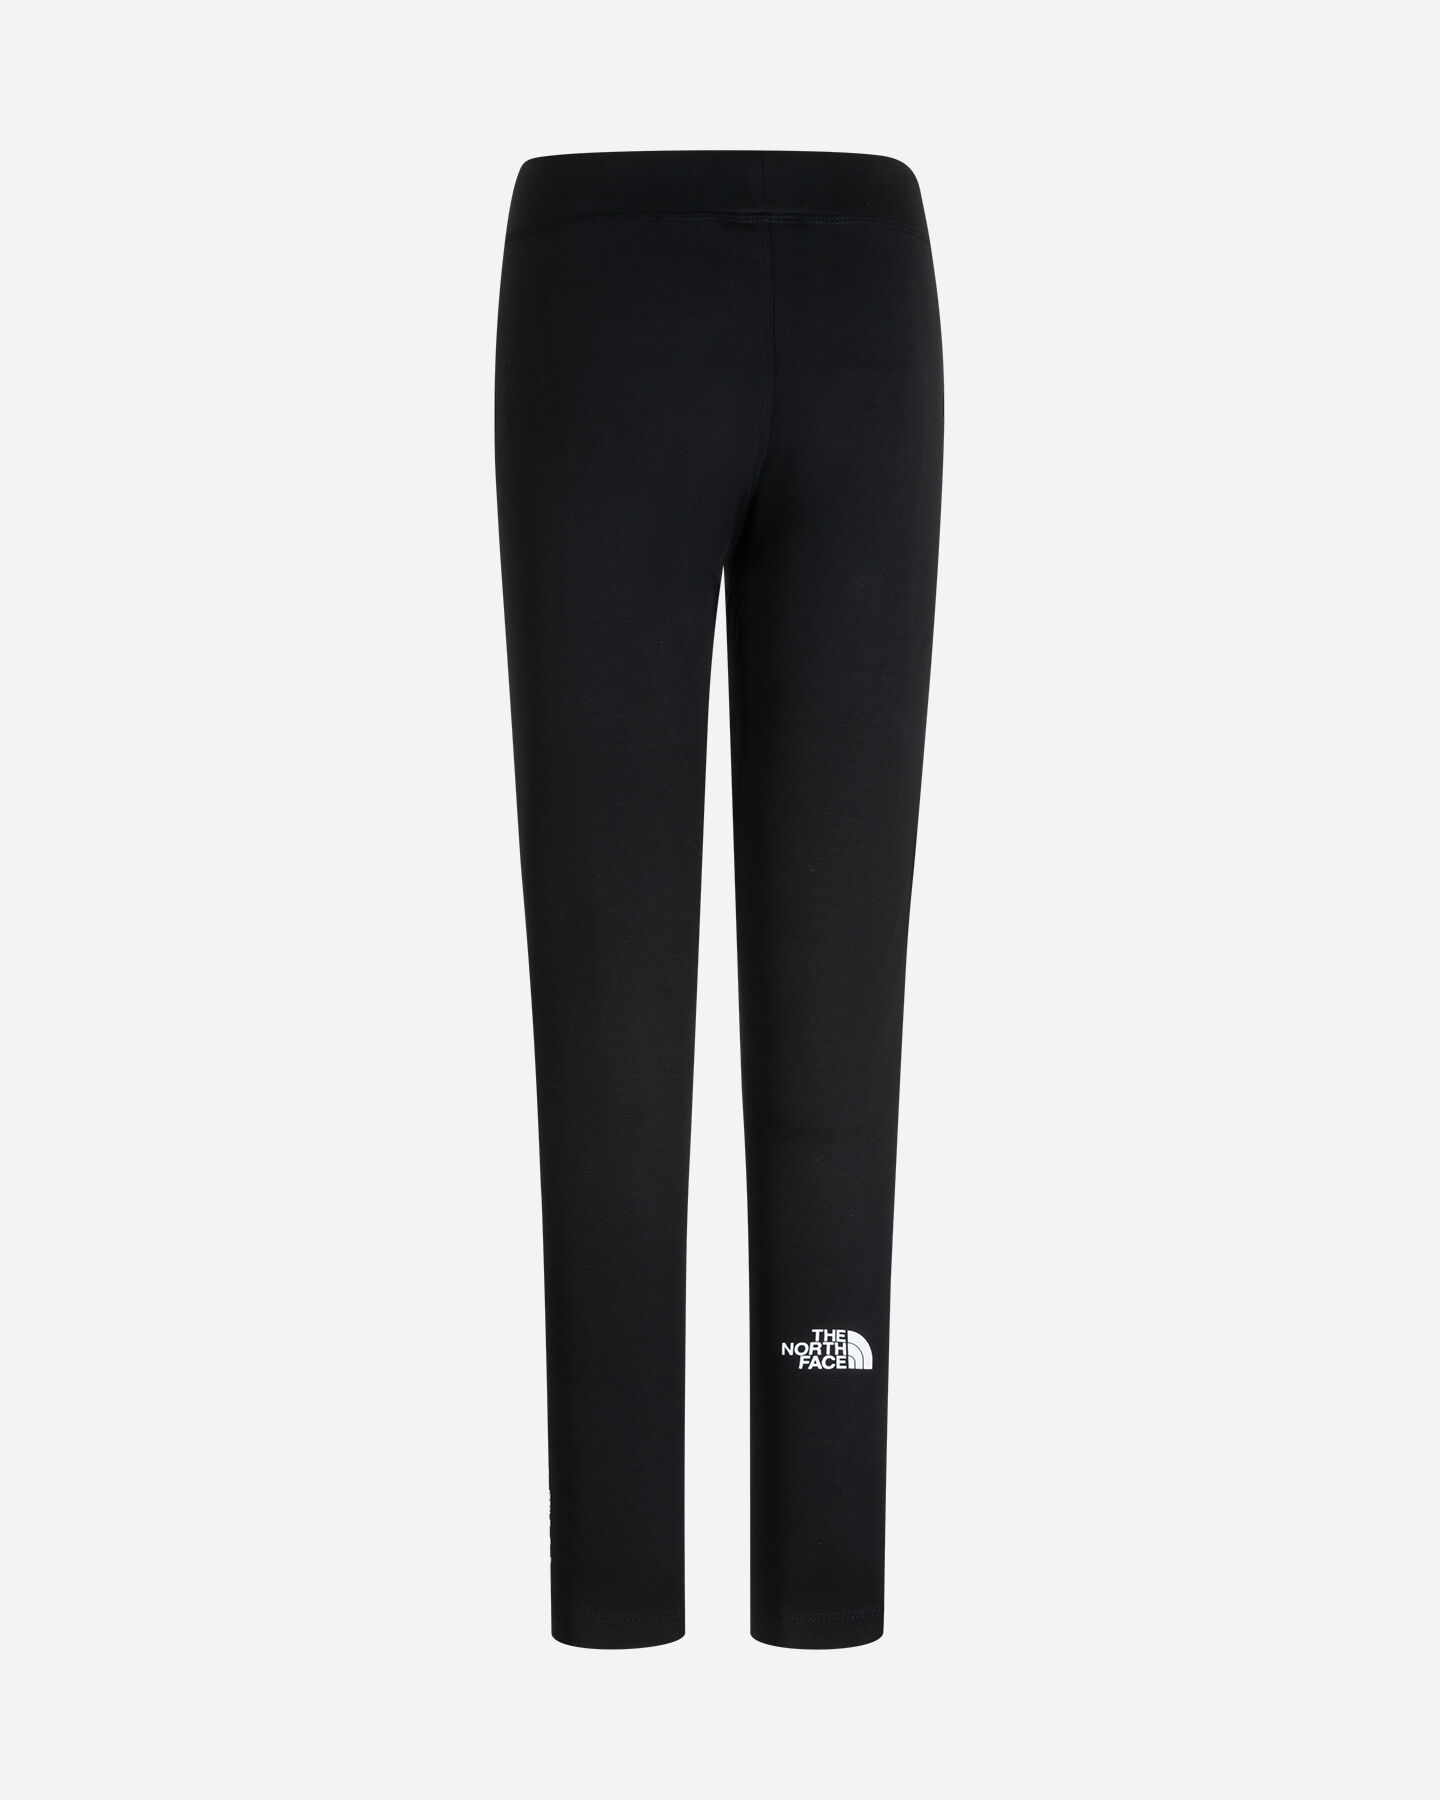  Leggings THE NORTH FACE TACUNE W S5612377|JK3|REGS scatto 1